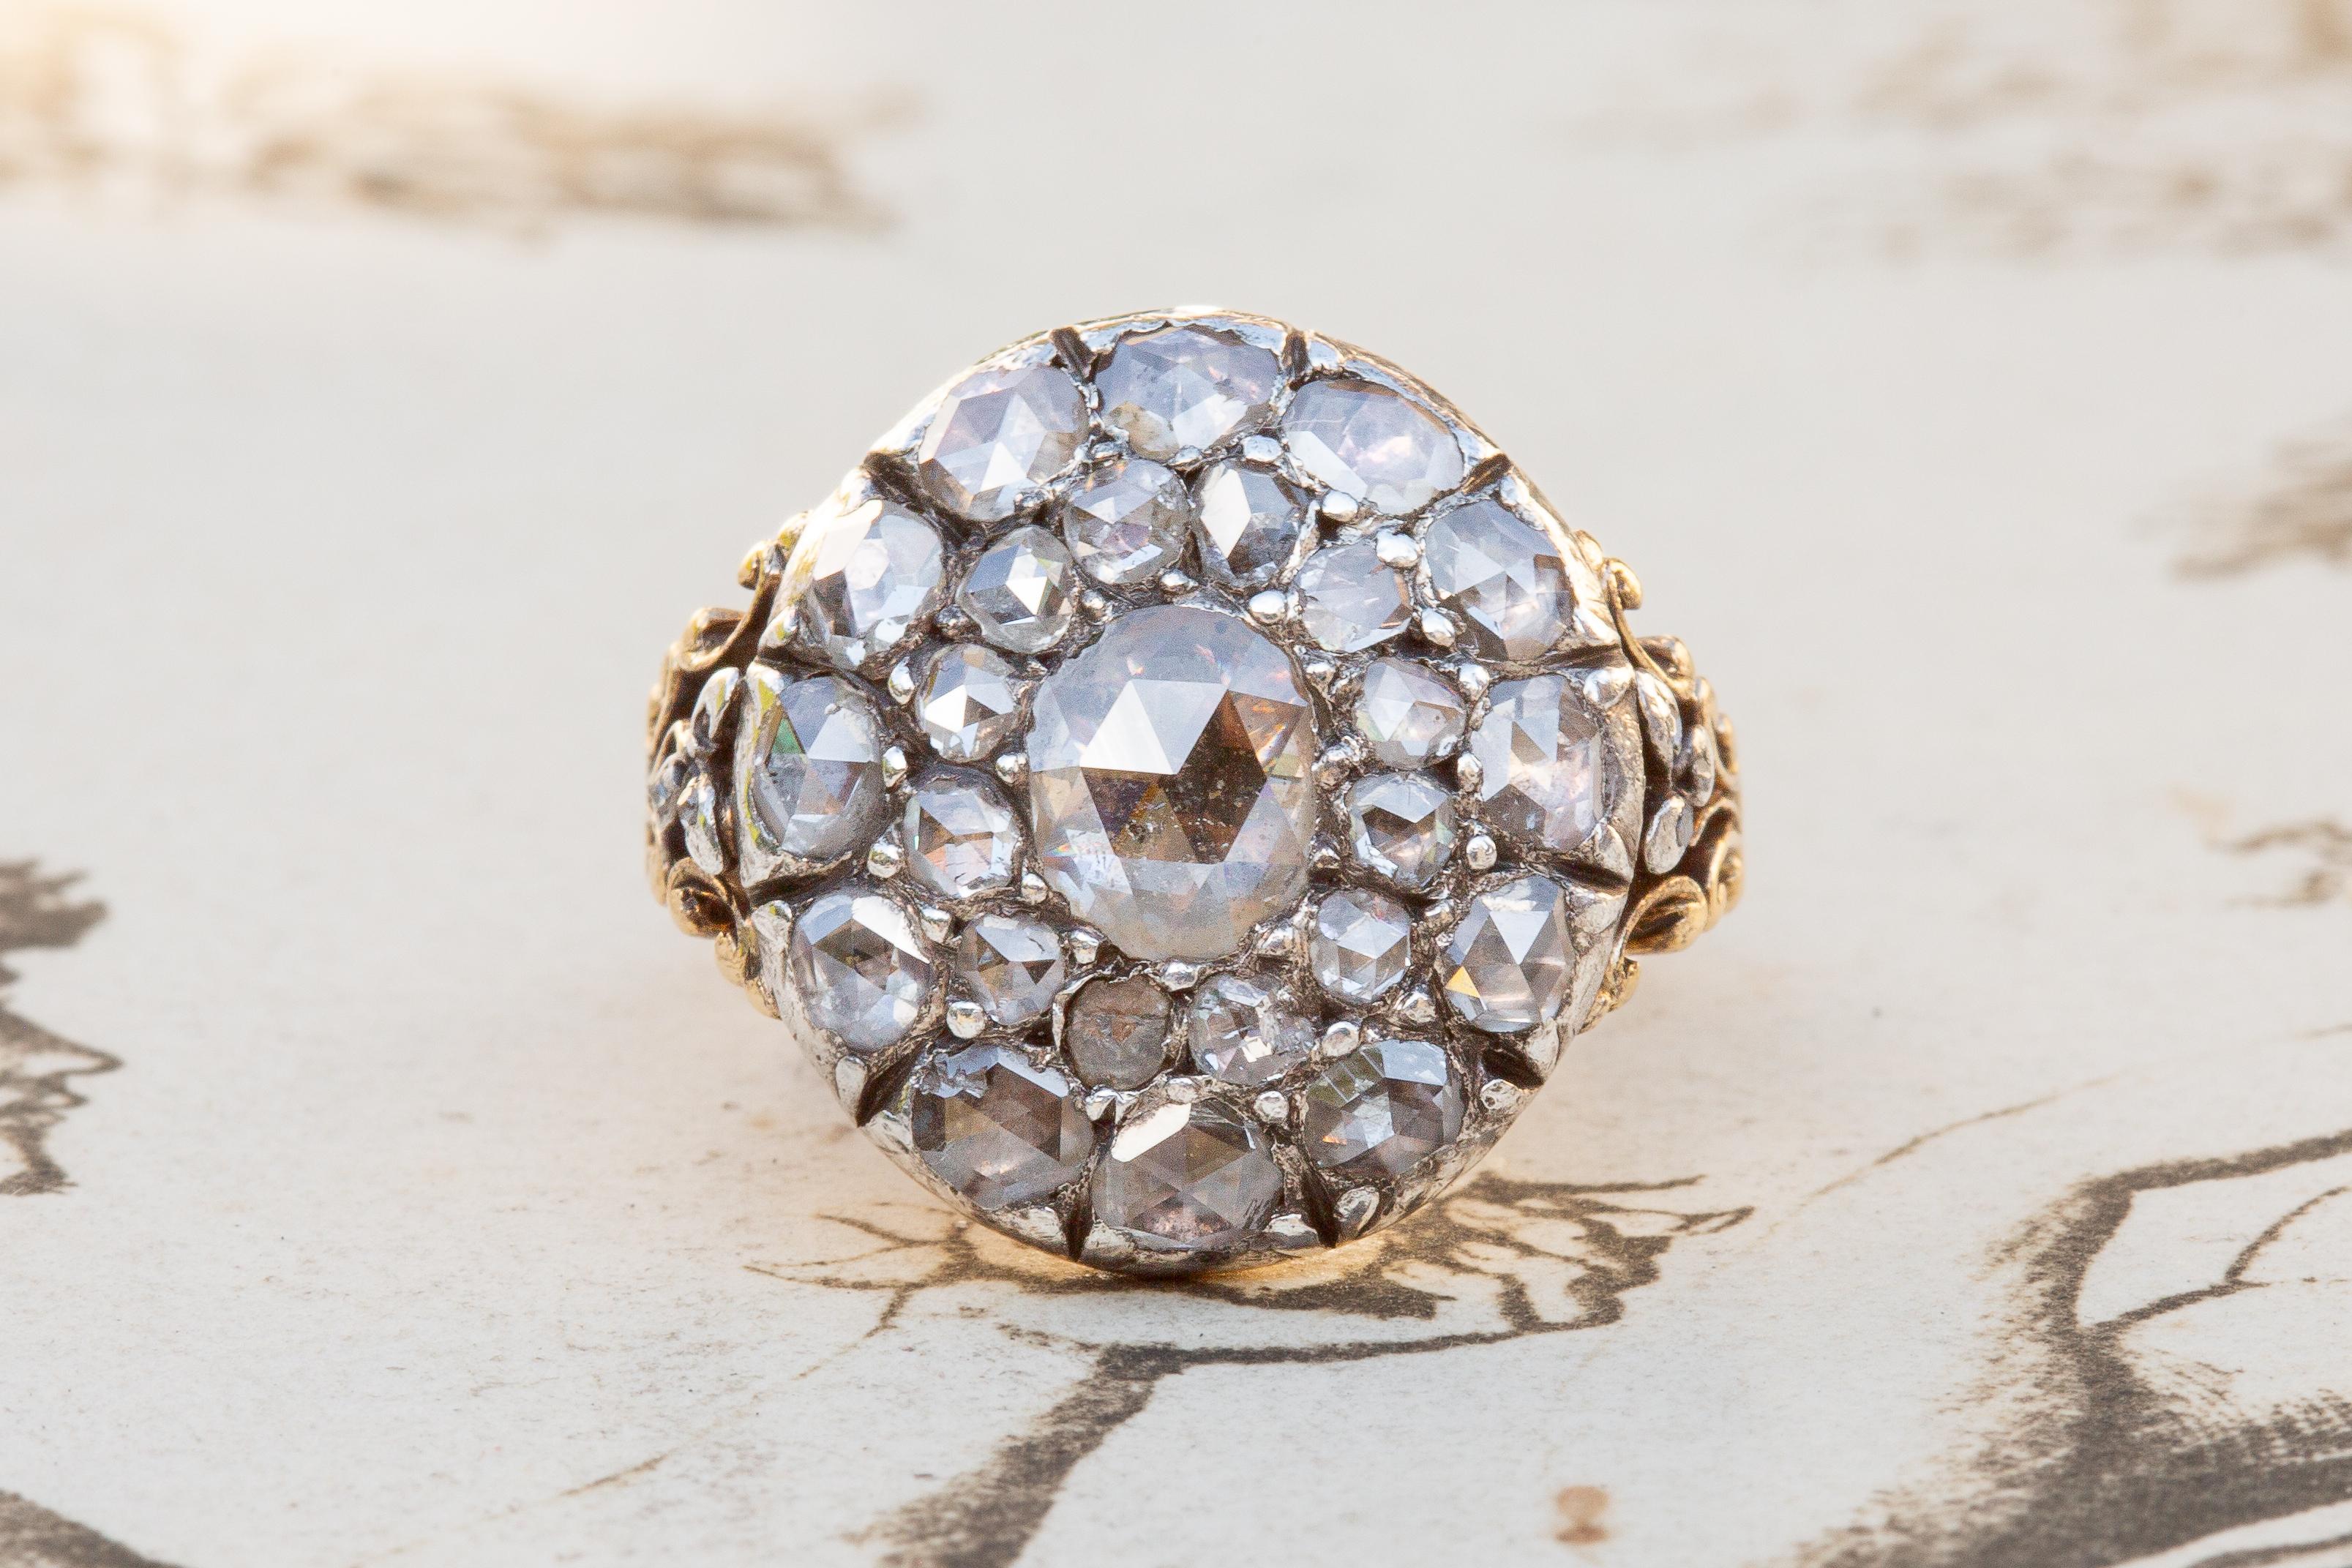 A superb 18th century Rococo diamond cluster ring made in Western Europe (Germany or Holland), circa 1760. Three concentric rows of foil-backed rose cut diamonds are set in closed back collet settings. The silver-topped gold bezel is typical of